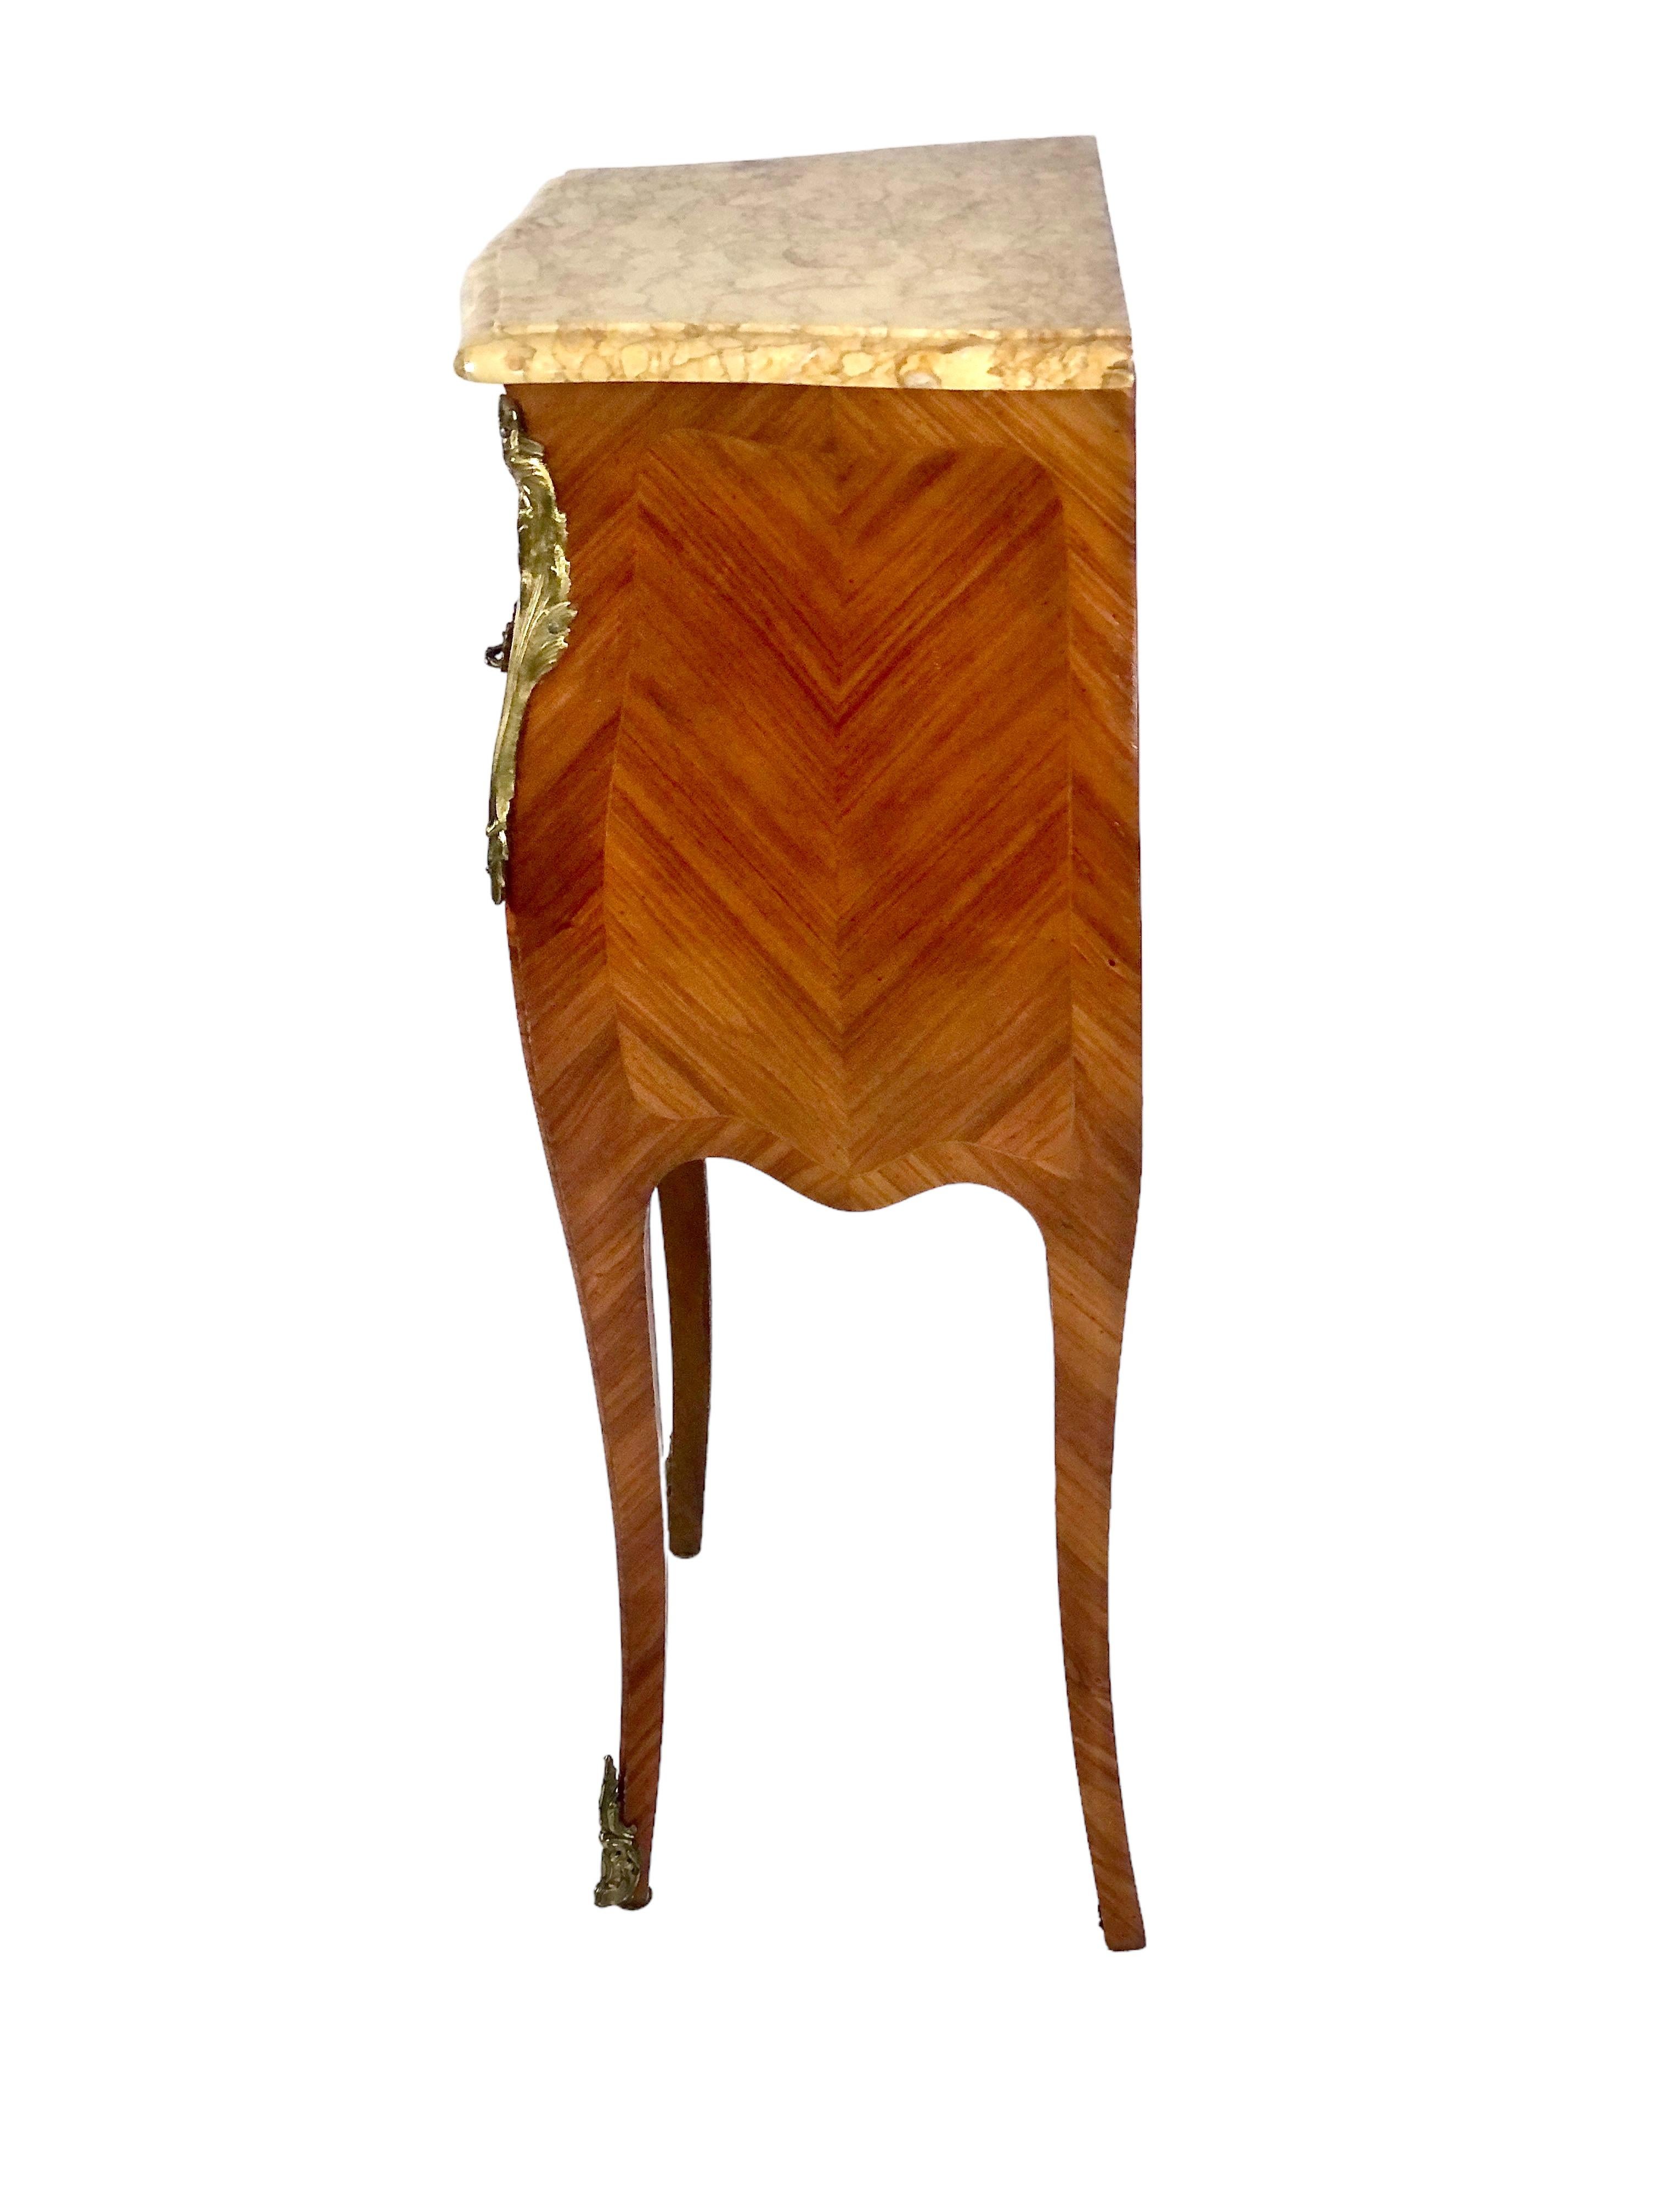 A fine French chevet (bedside table) in Louis XV style marquetry inlaid fruitwood with a marble top. Some lovely gilt bronze handles adorn the three shallow drawers, while the delicate, tapered legs are decorated with matching gilt bronze mounts in